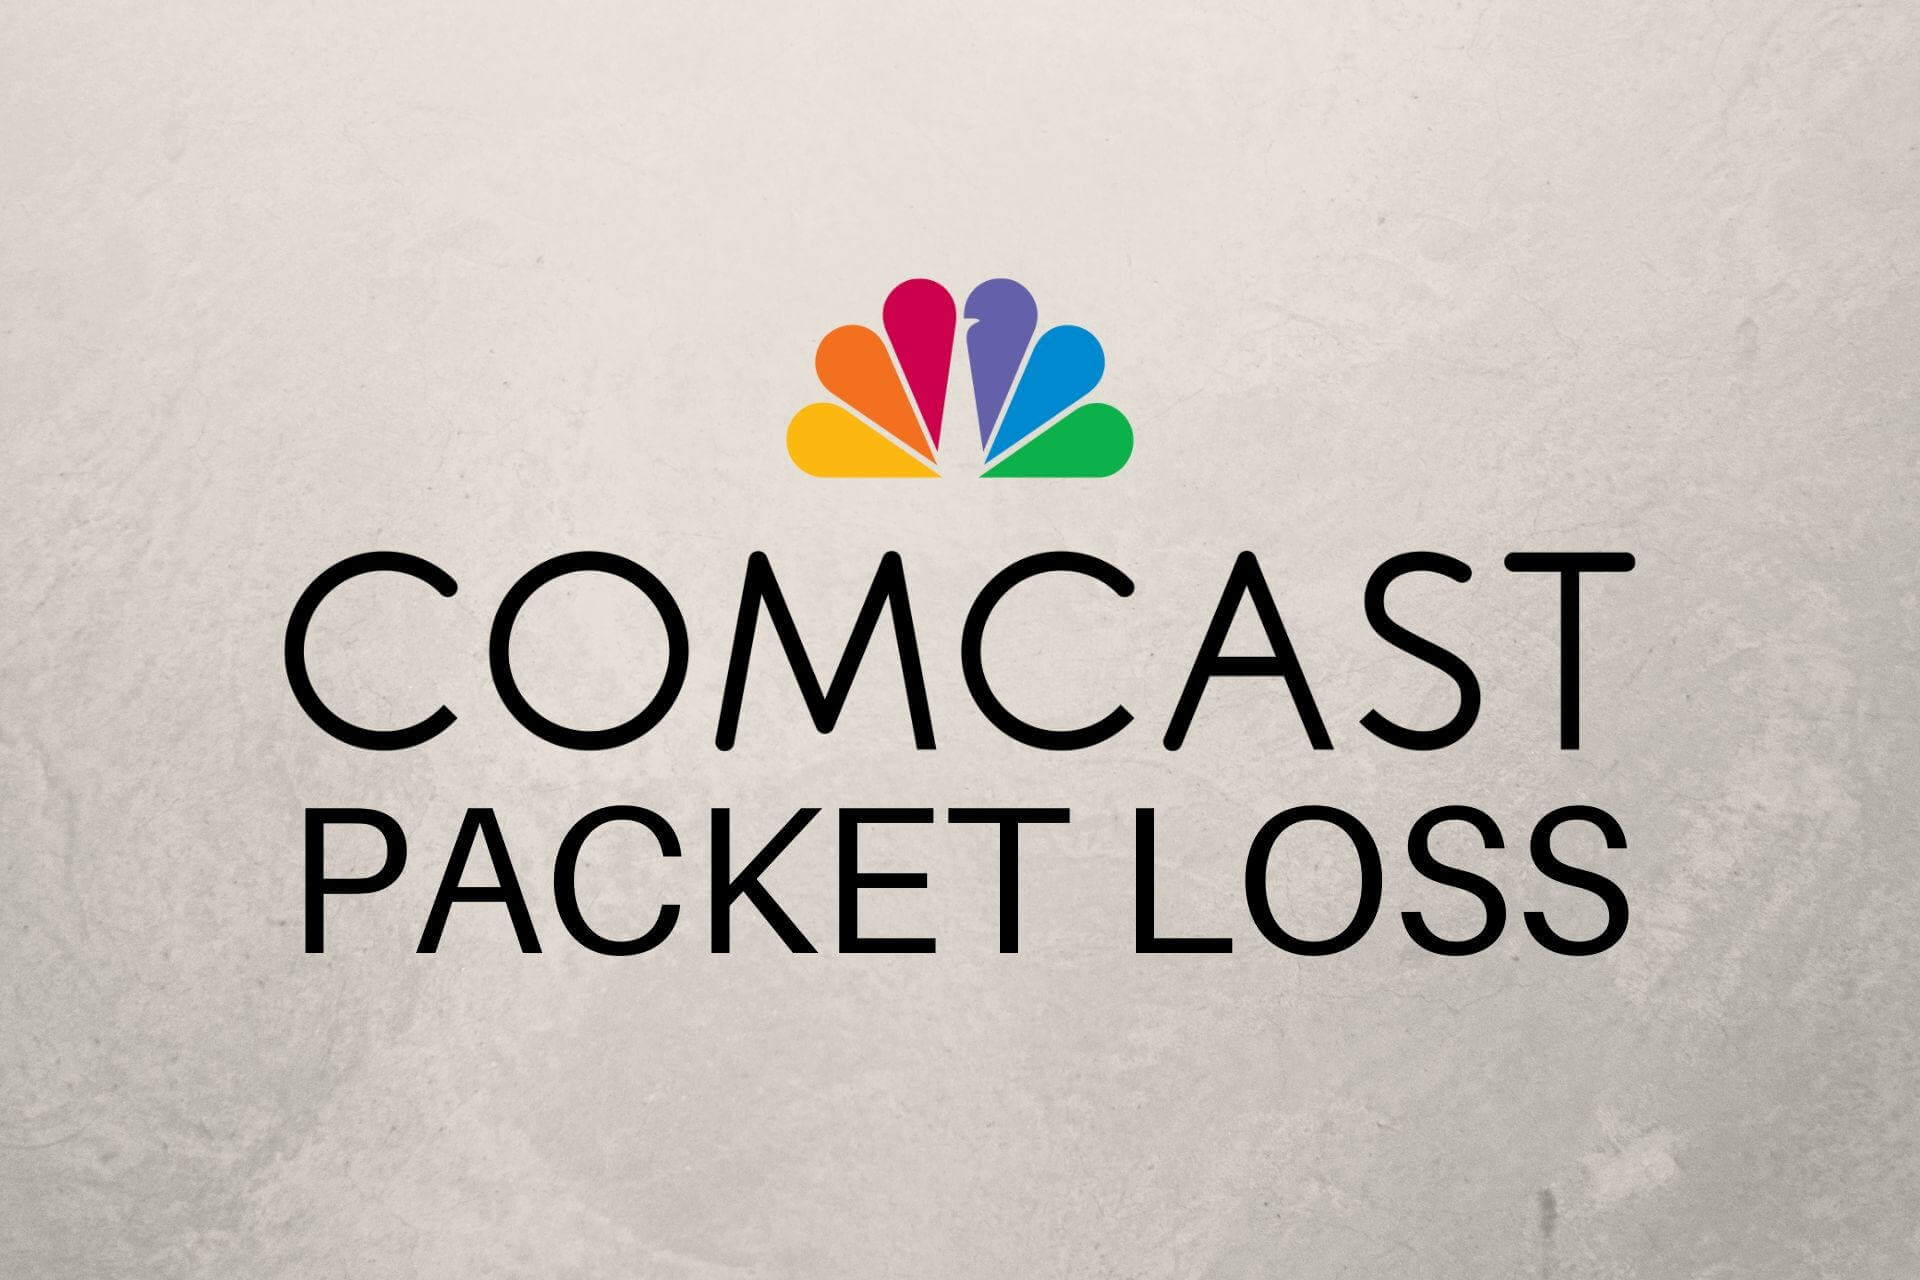 Packet loss Comcast